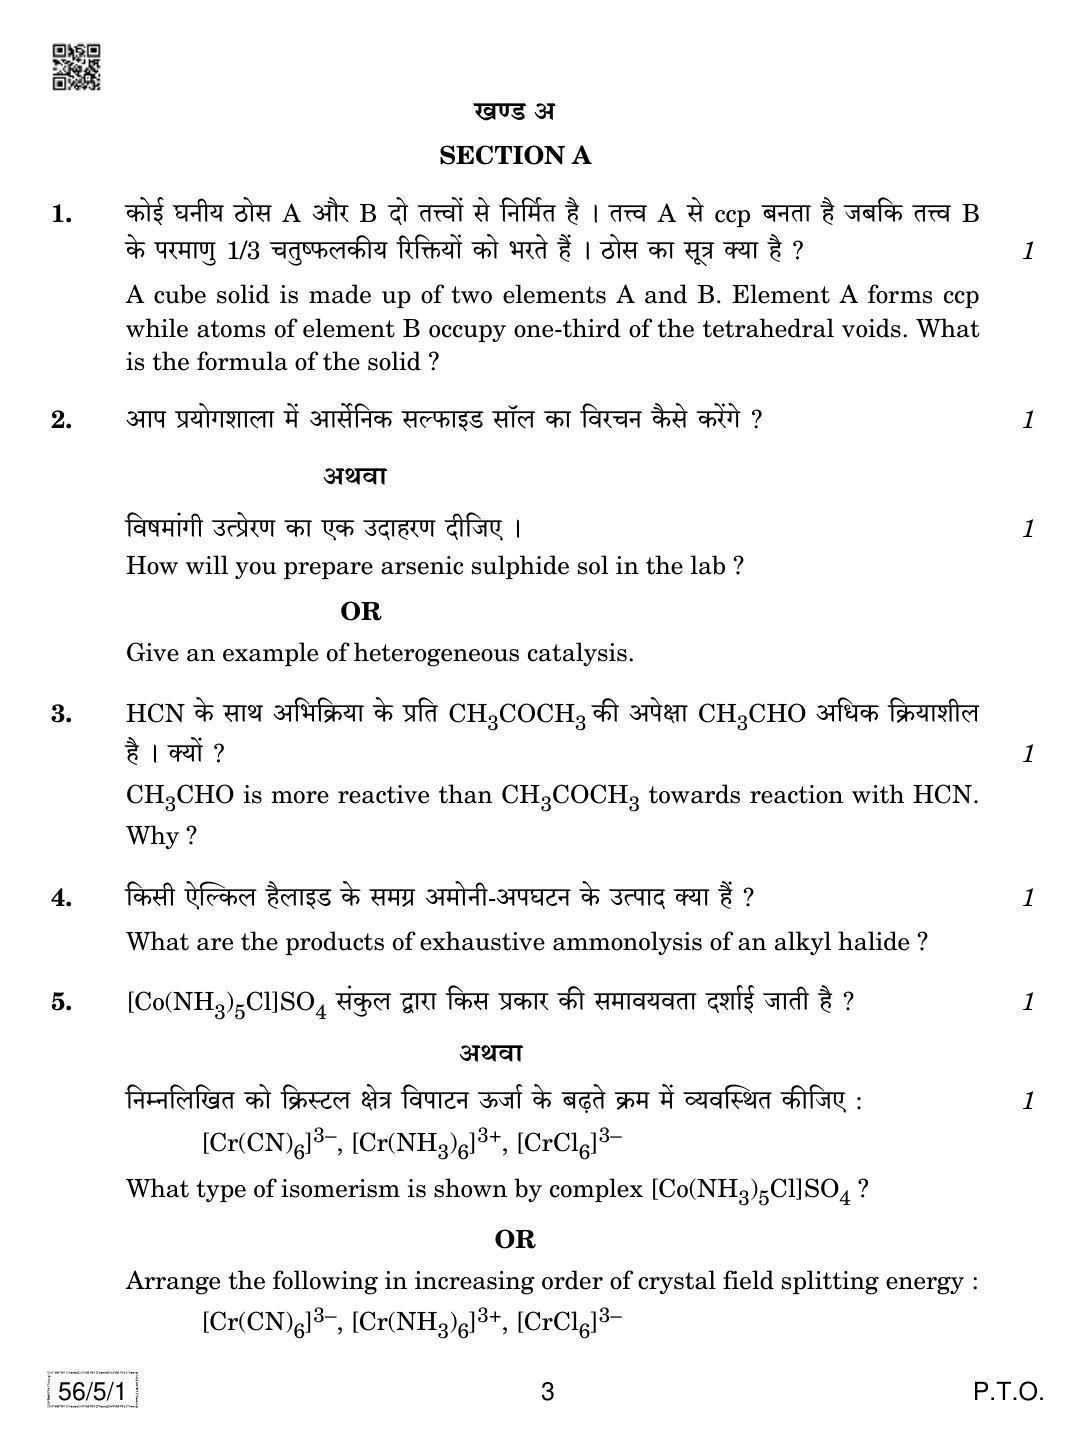 CBSE Class 12 56-5-1 Chemistry 2019 Question Paper - Page 3